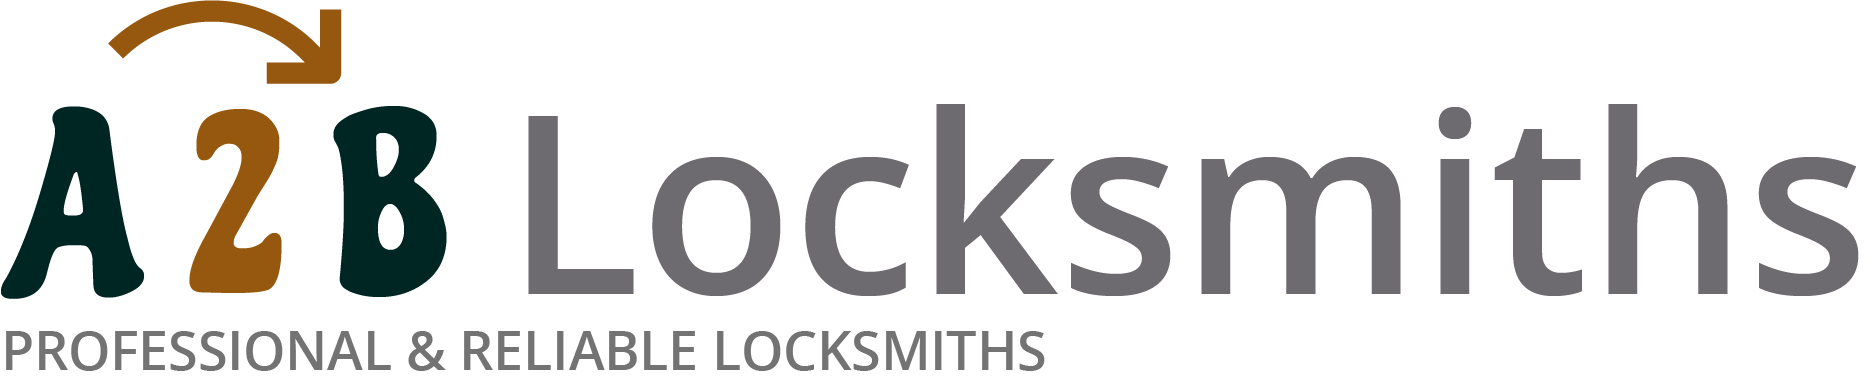 If you are locked out of house in Maidstone, our 24/7 local emergency locksmith services can help you.